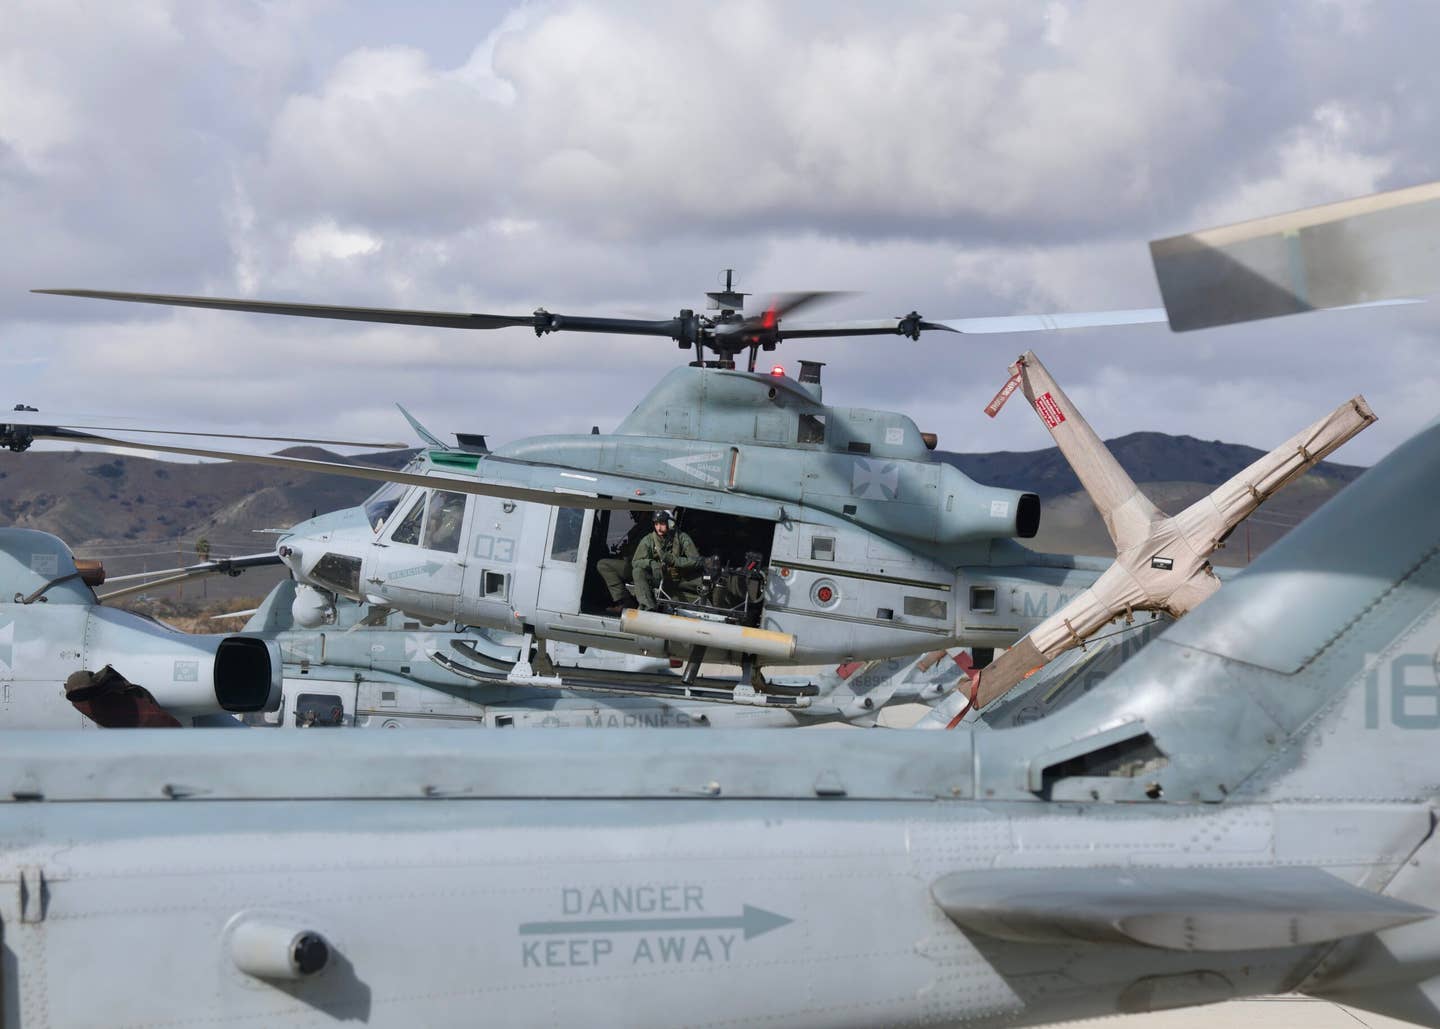 A UH-1Y operating among its parked attack and utility counterparts. (Author)